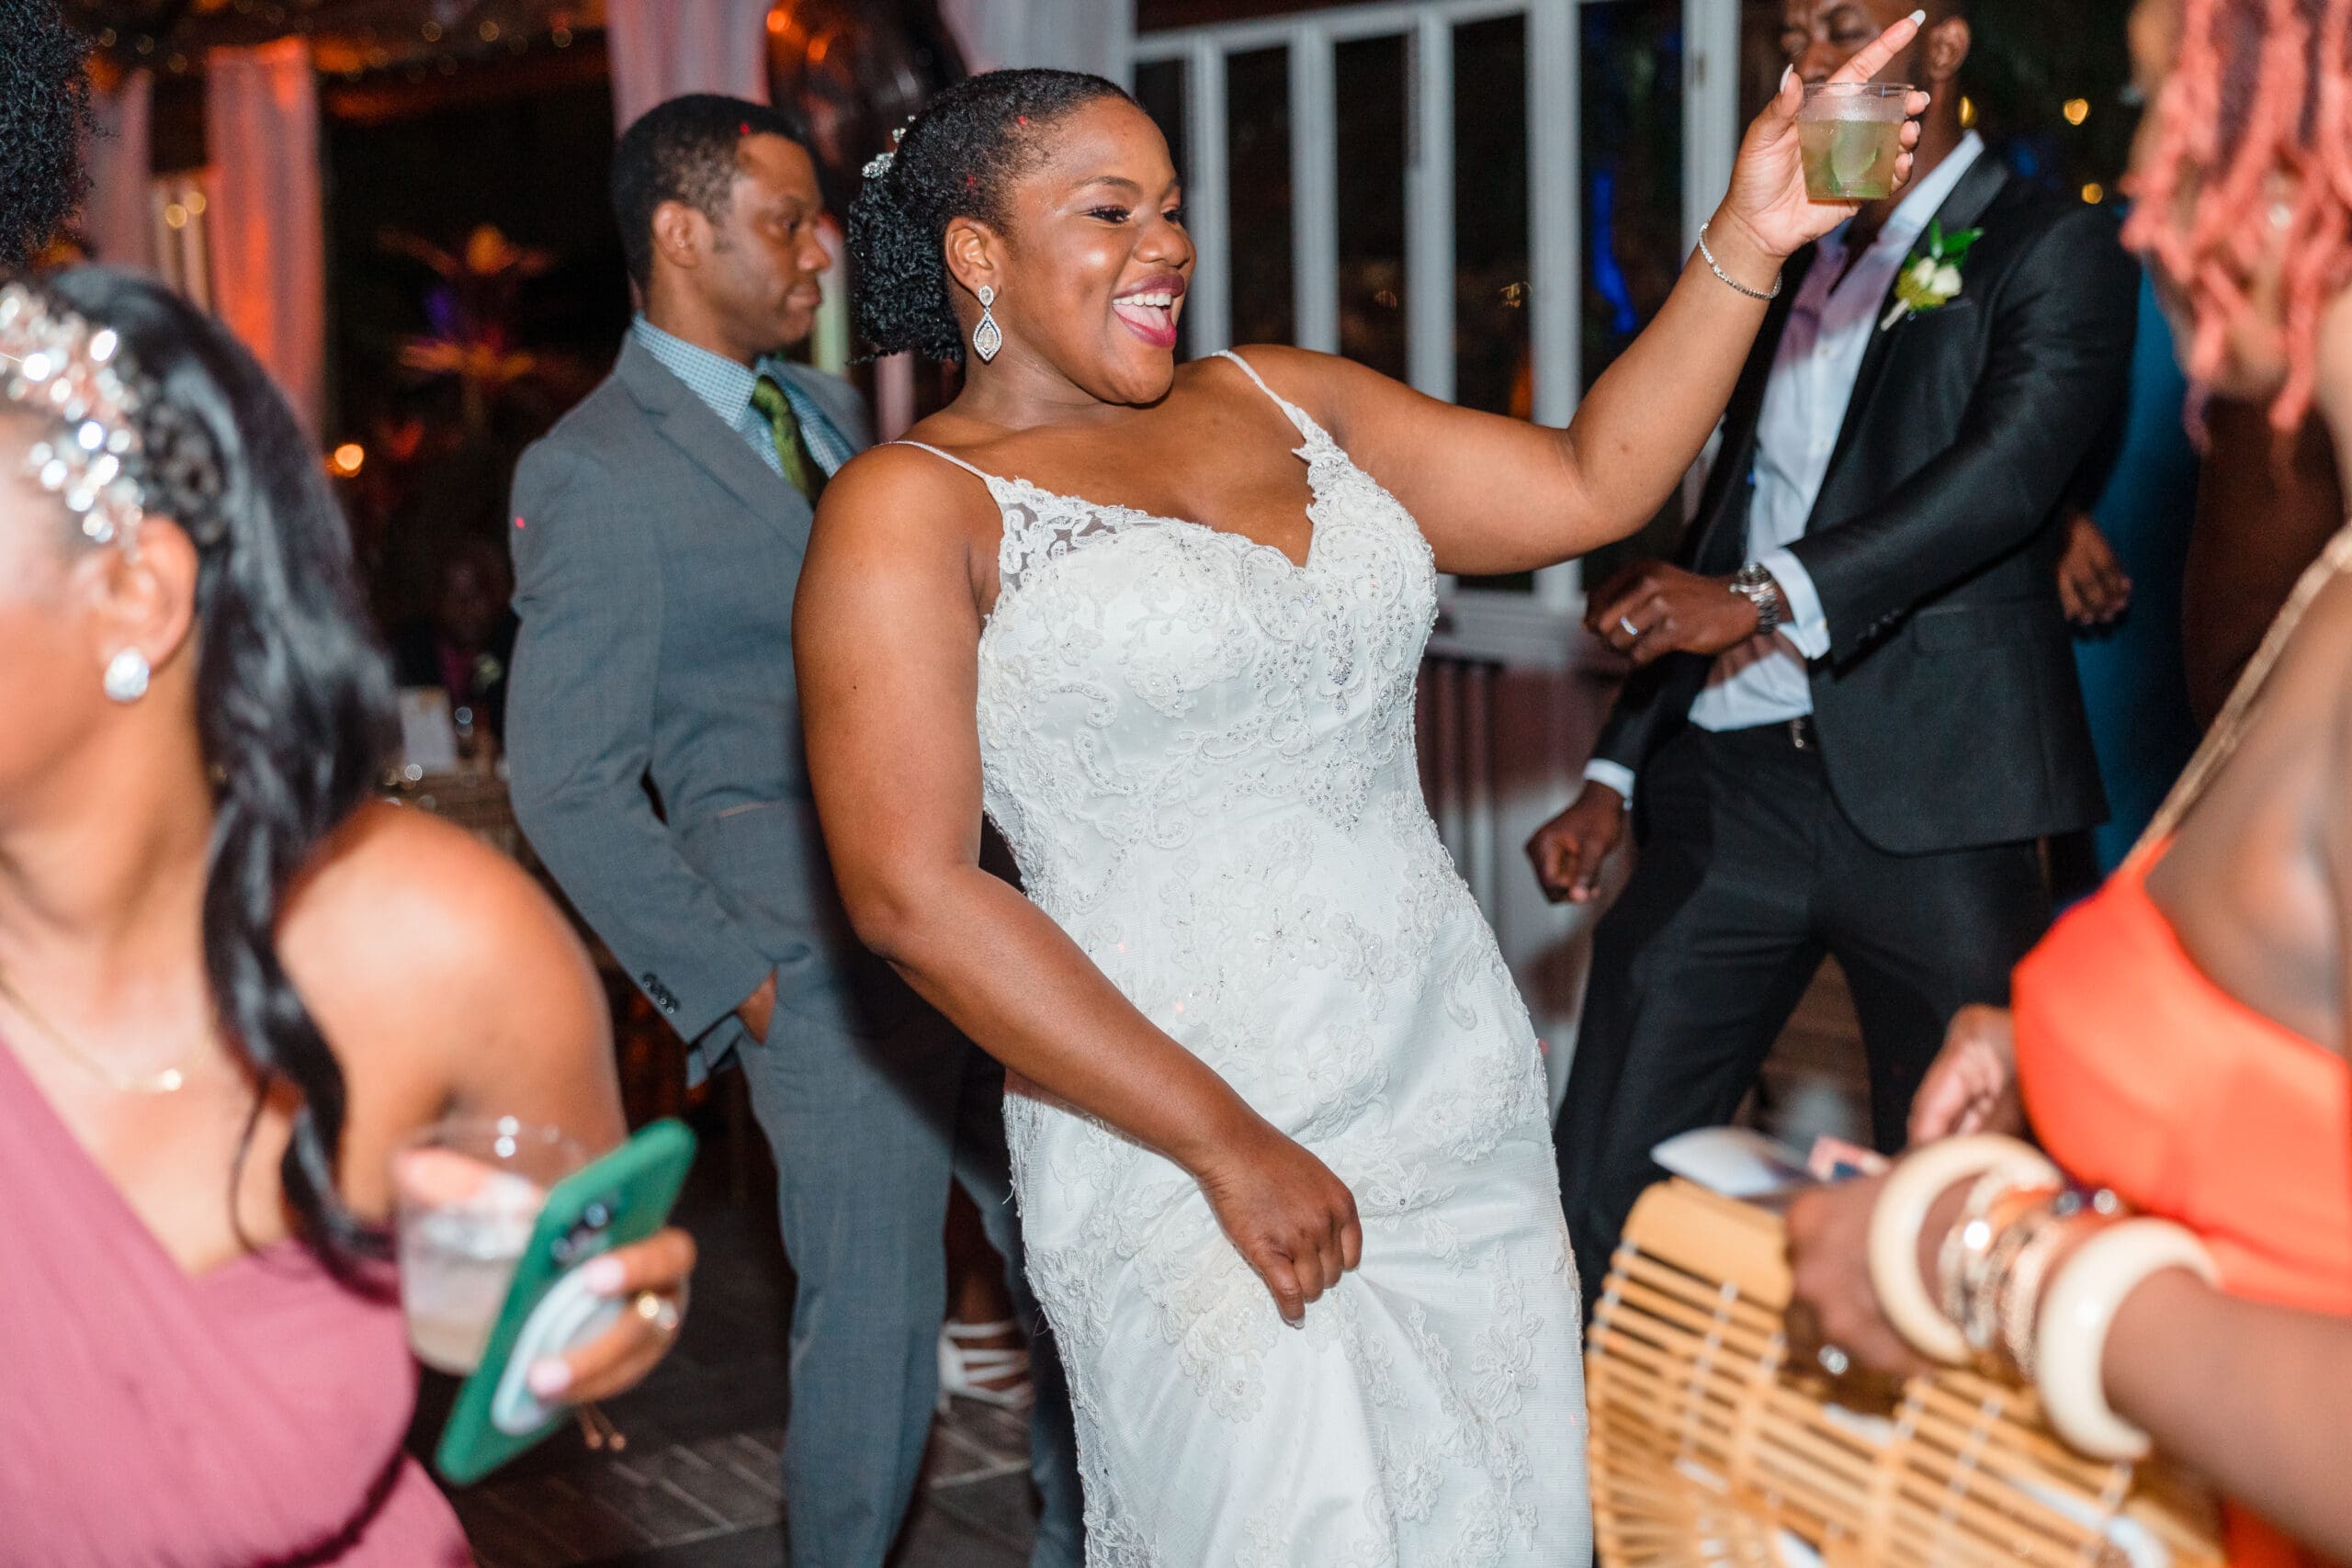 Kourtni having a blast on the dance floor with her guests, drink in hand, at Paradise Cove, captured by Jerzy Nieves Photography.